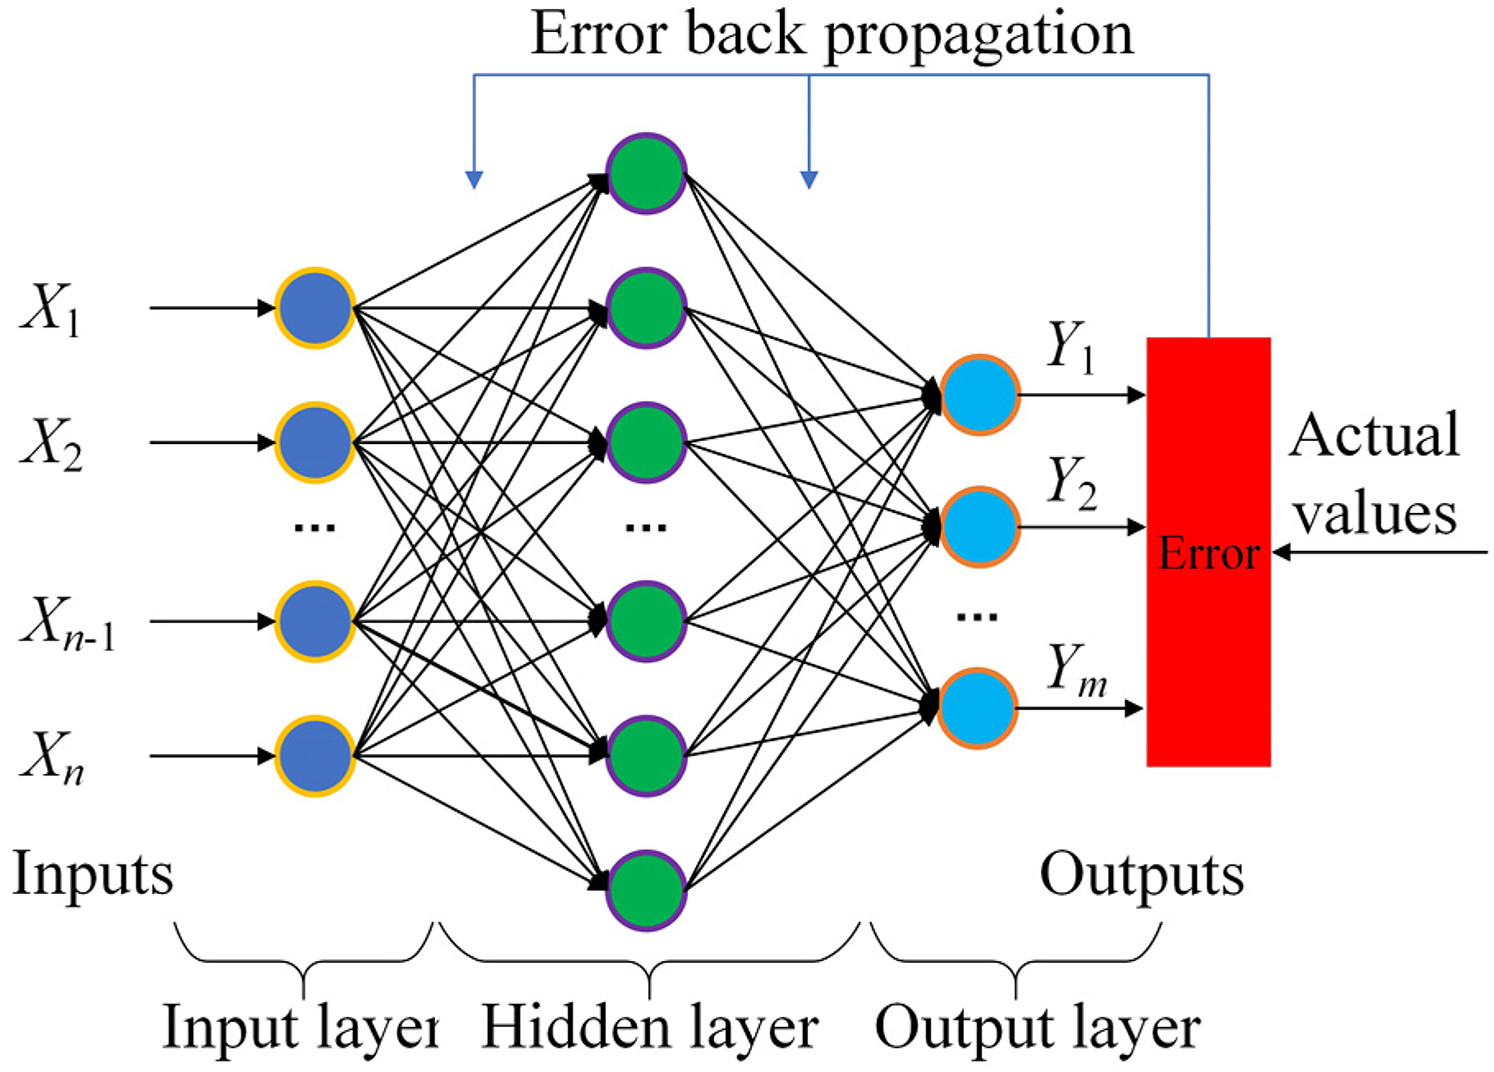 neural network structure